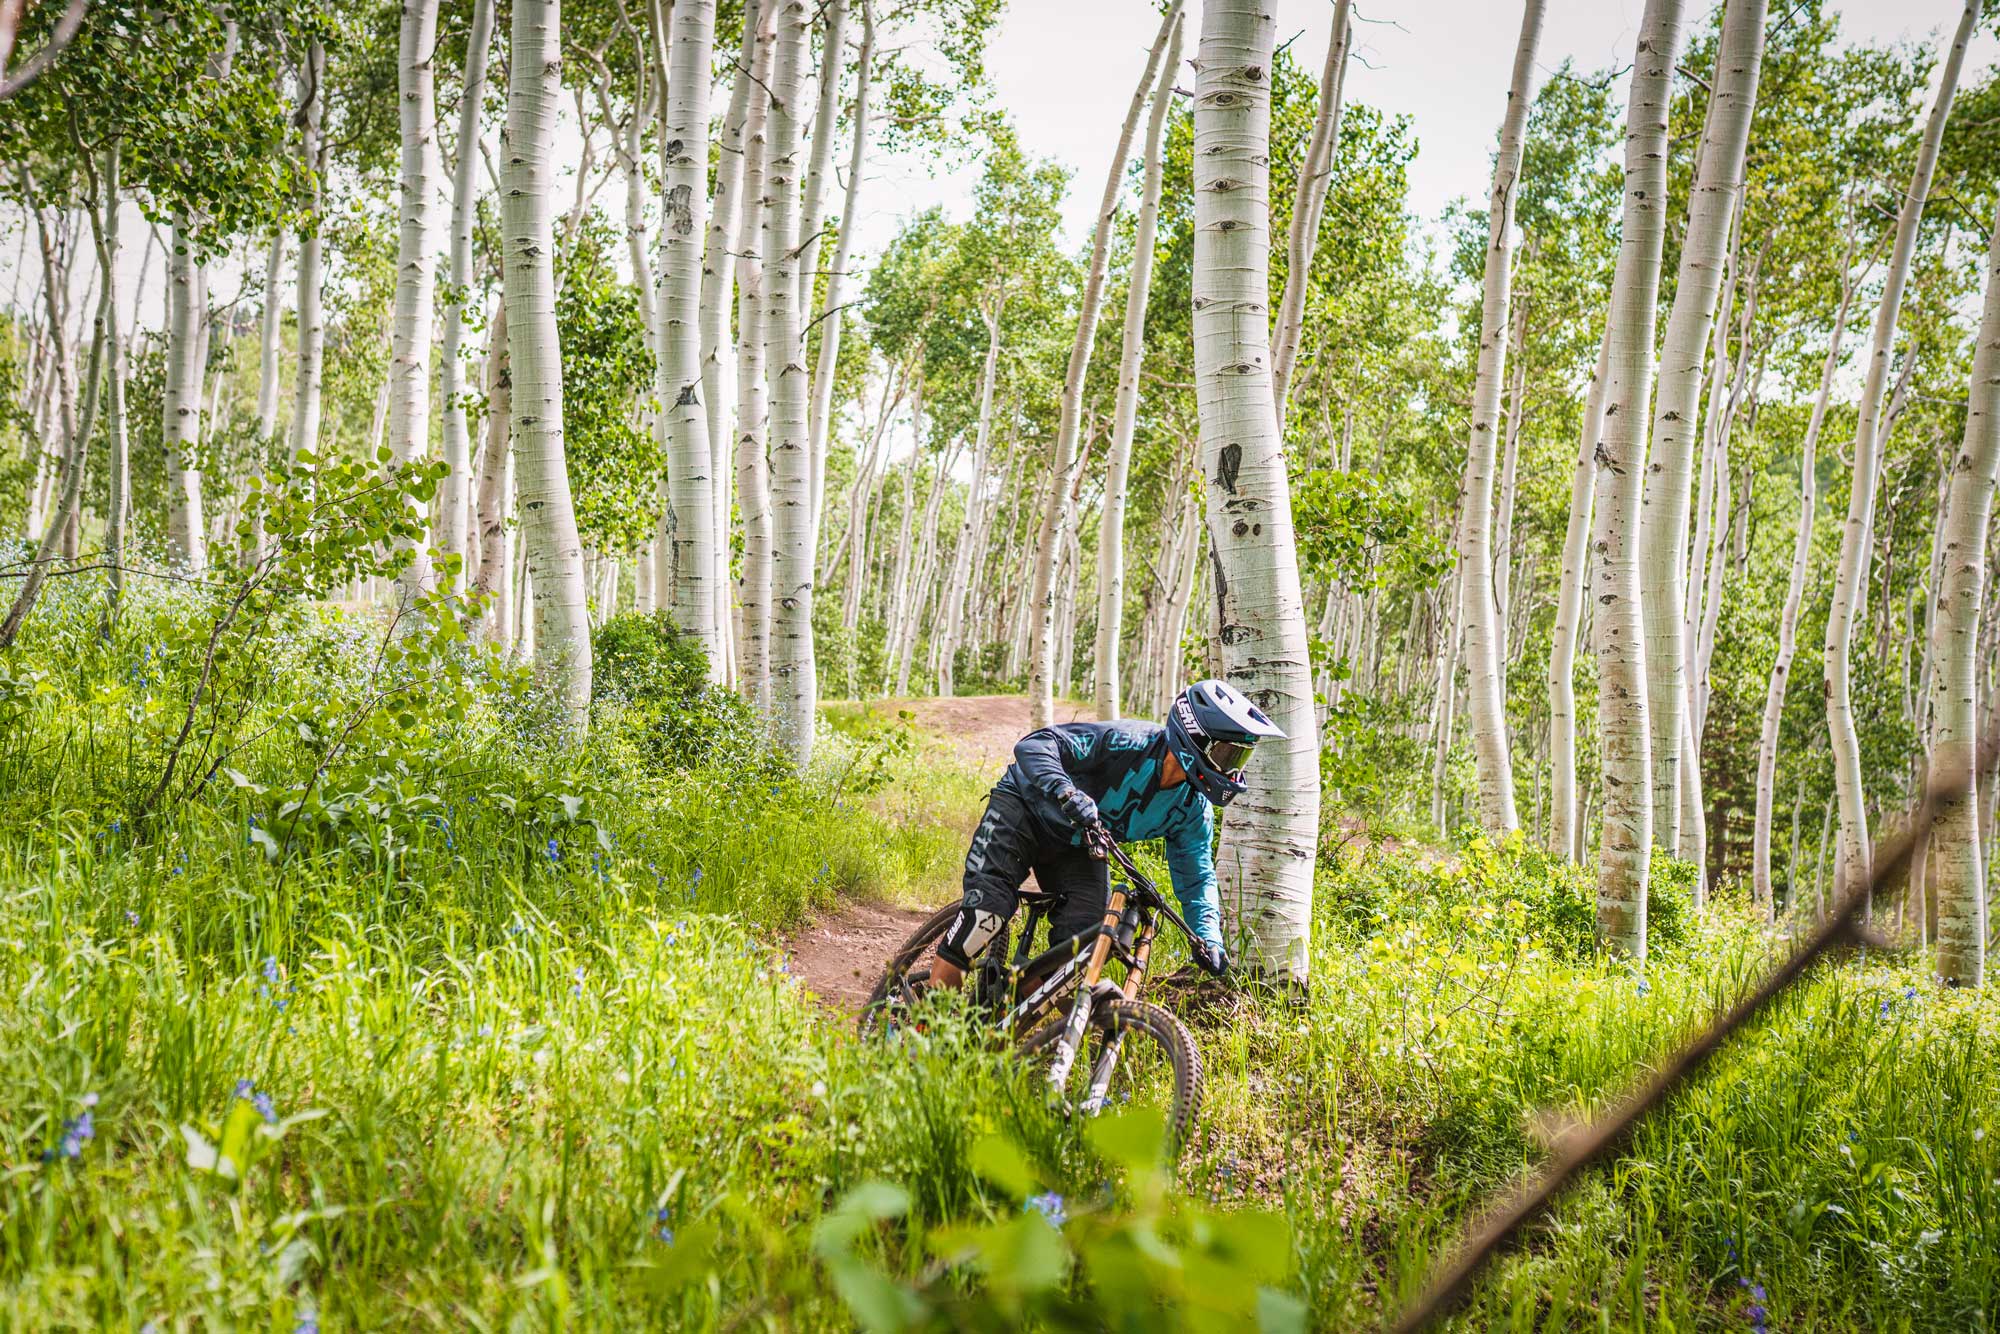 North American Bike Park Review Tour - Deer Valley